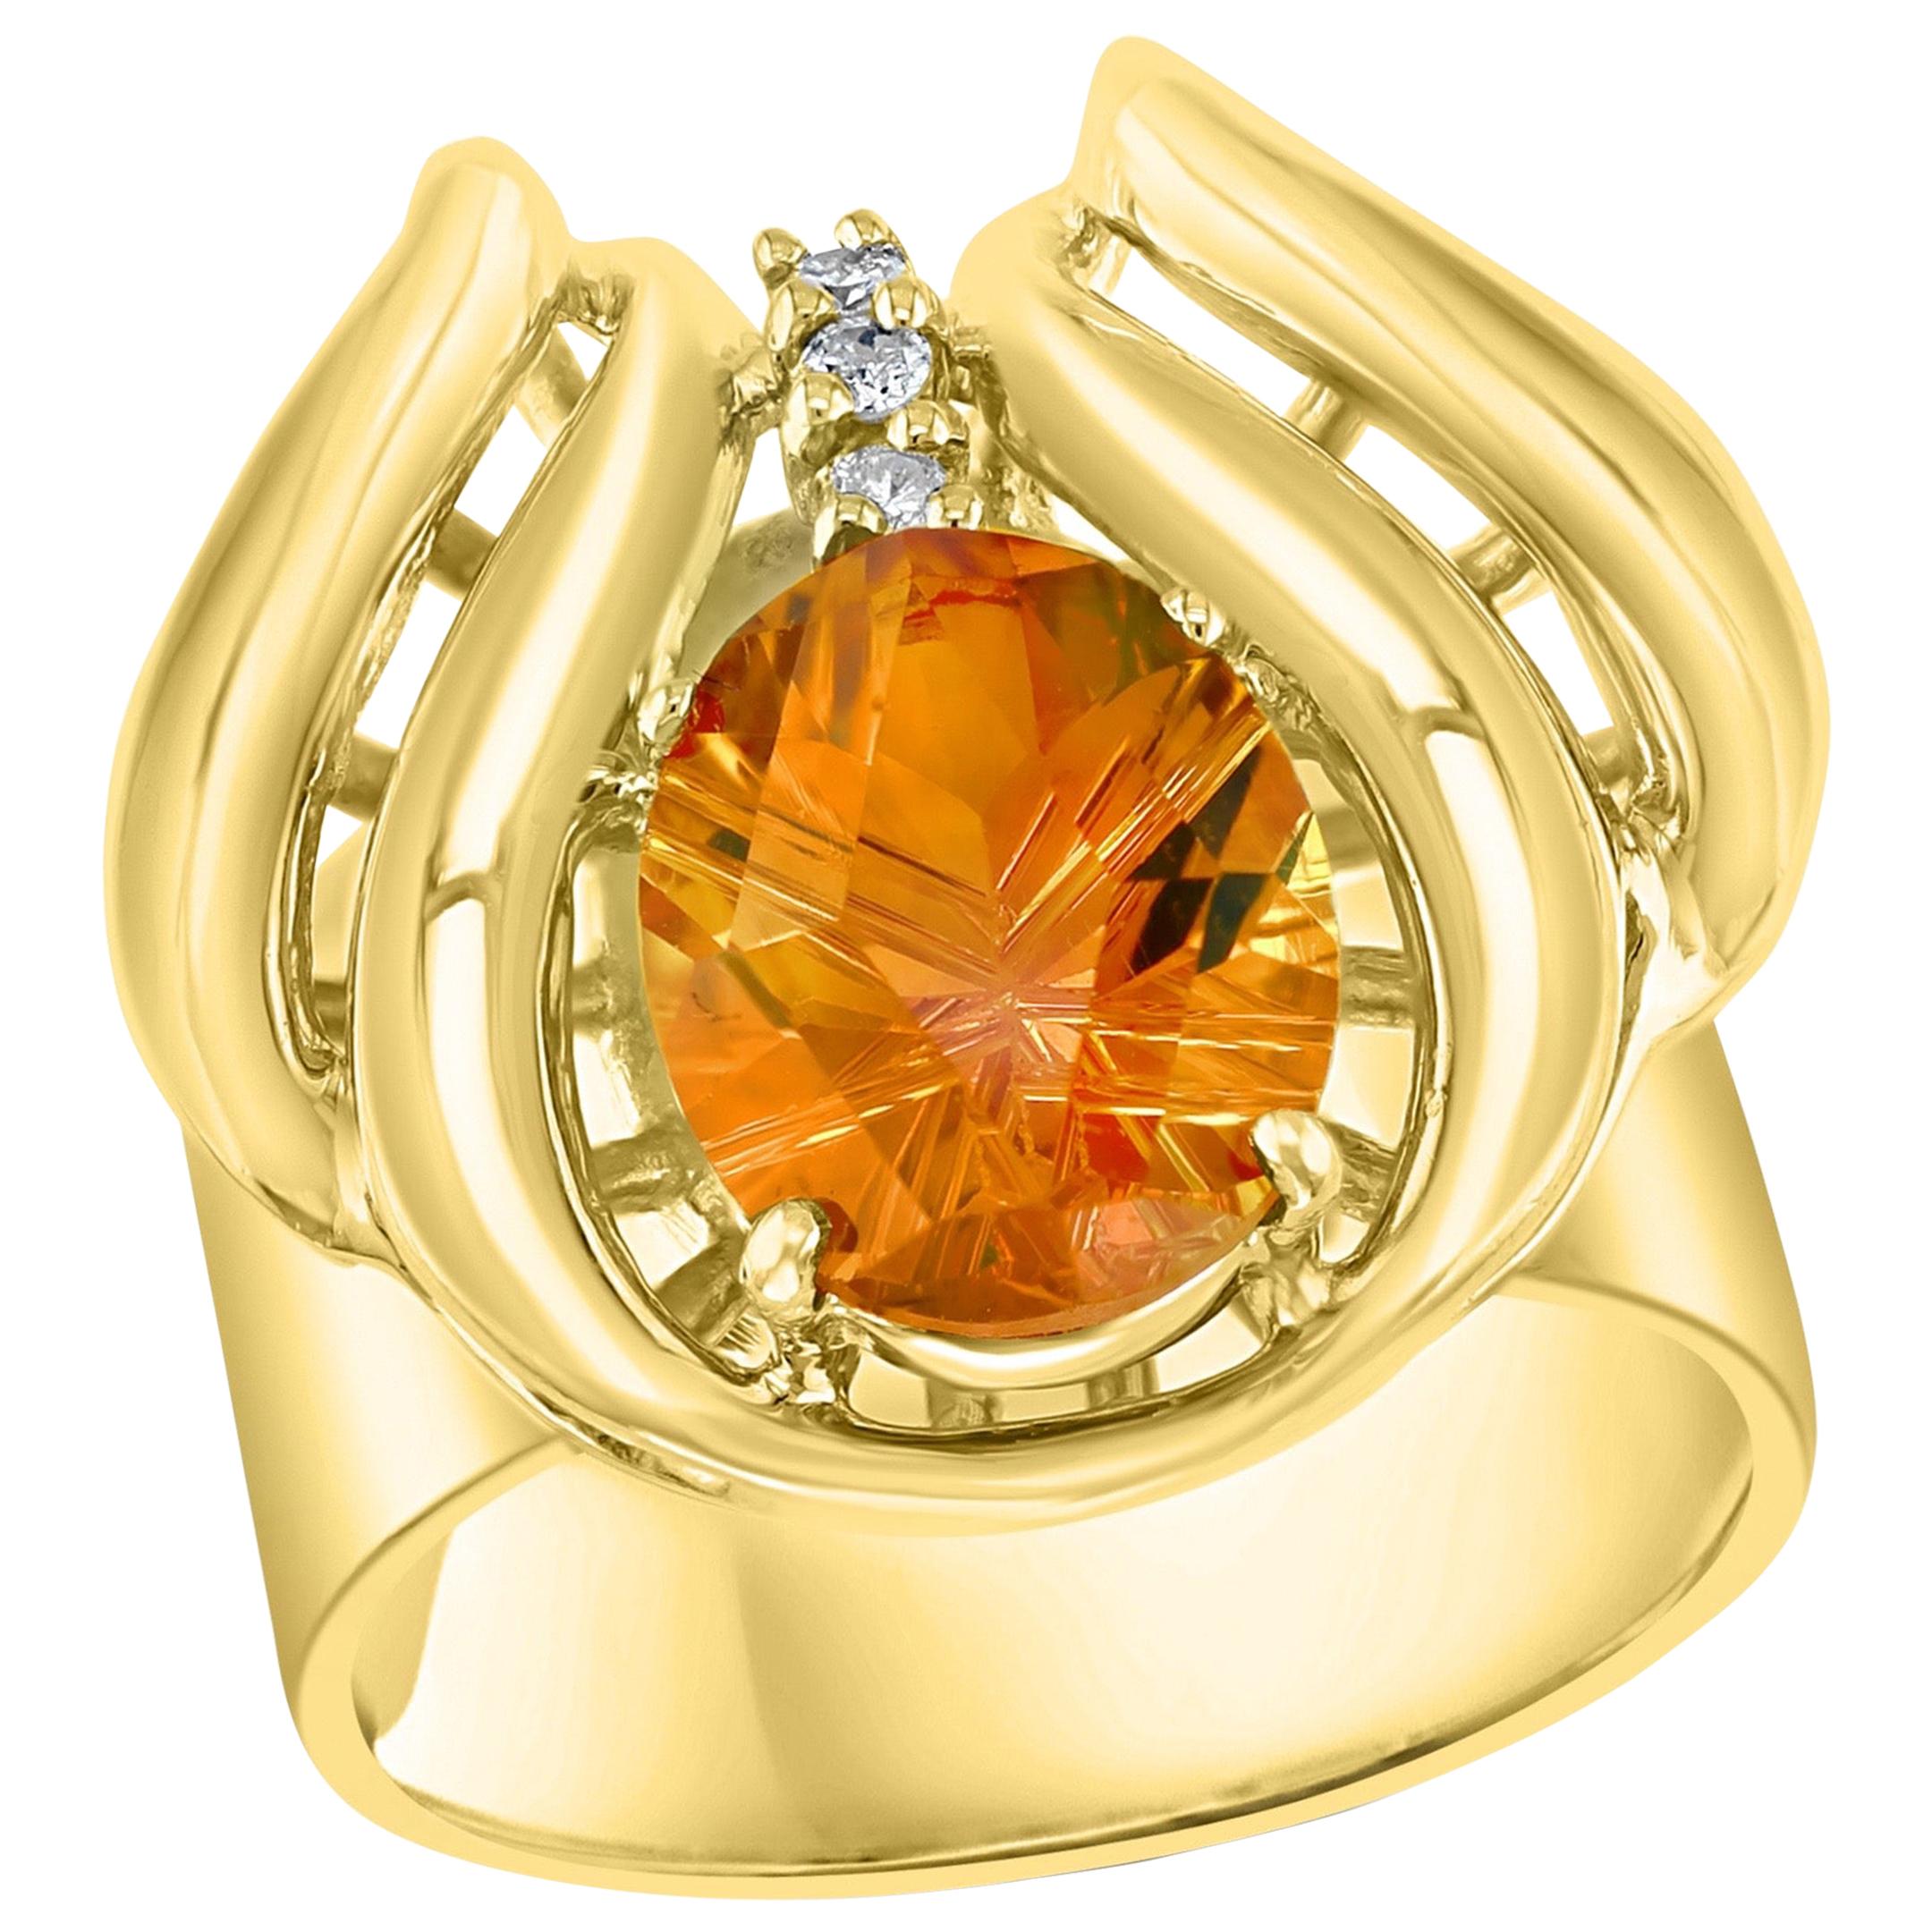 4 Carat Oval Citrine and Diamond Ring in 14 Karat Yellow Gold, Estate For Sale